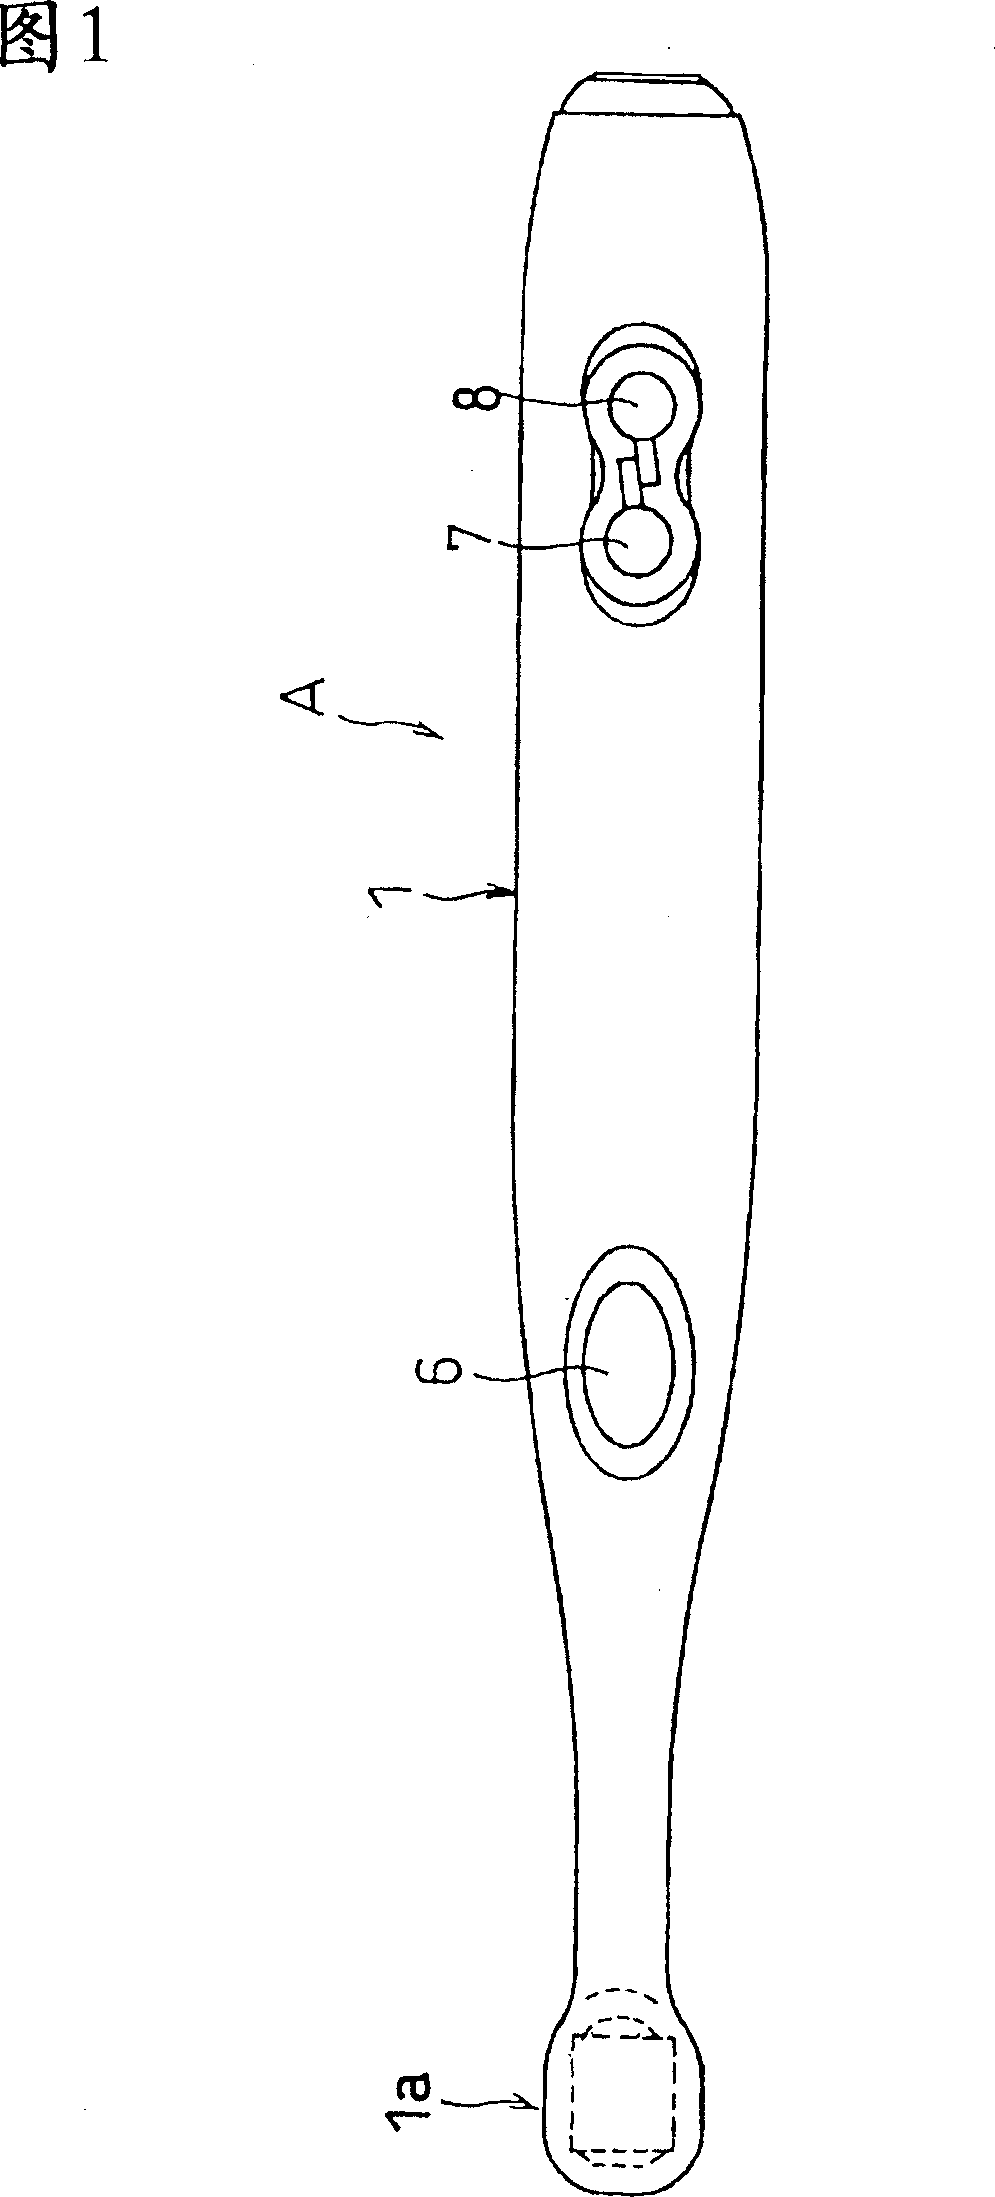 Living body observing apparatus, intraoral imaging system, and medical treatment appliance